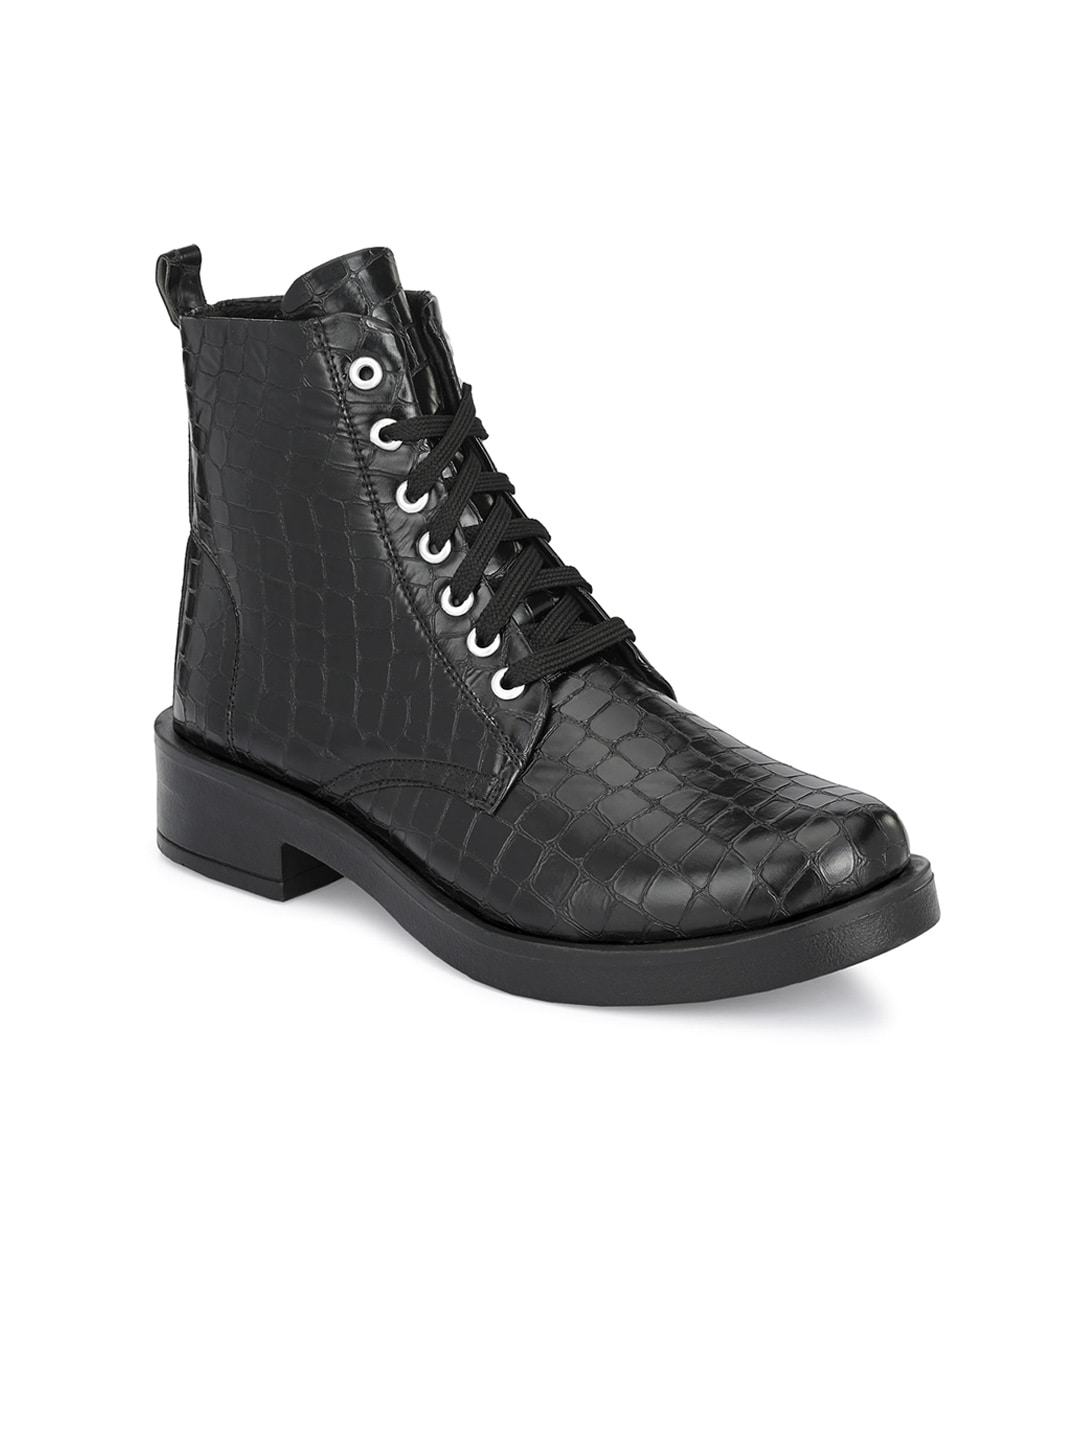 AfroJack Women Black Textured Boots Price in India